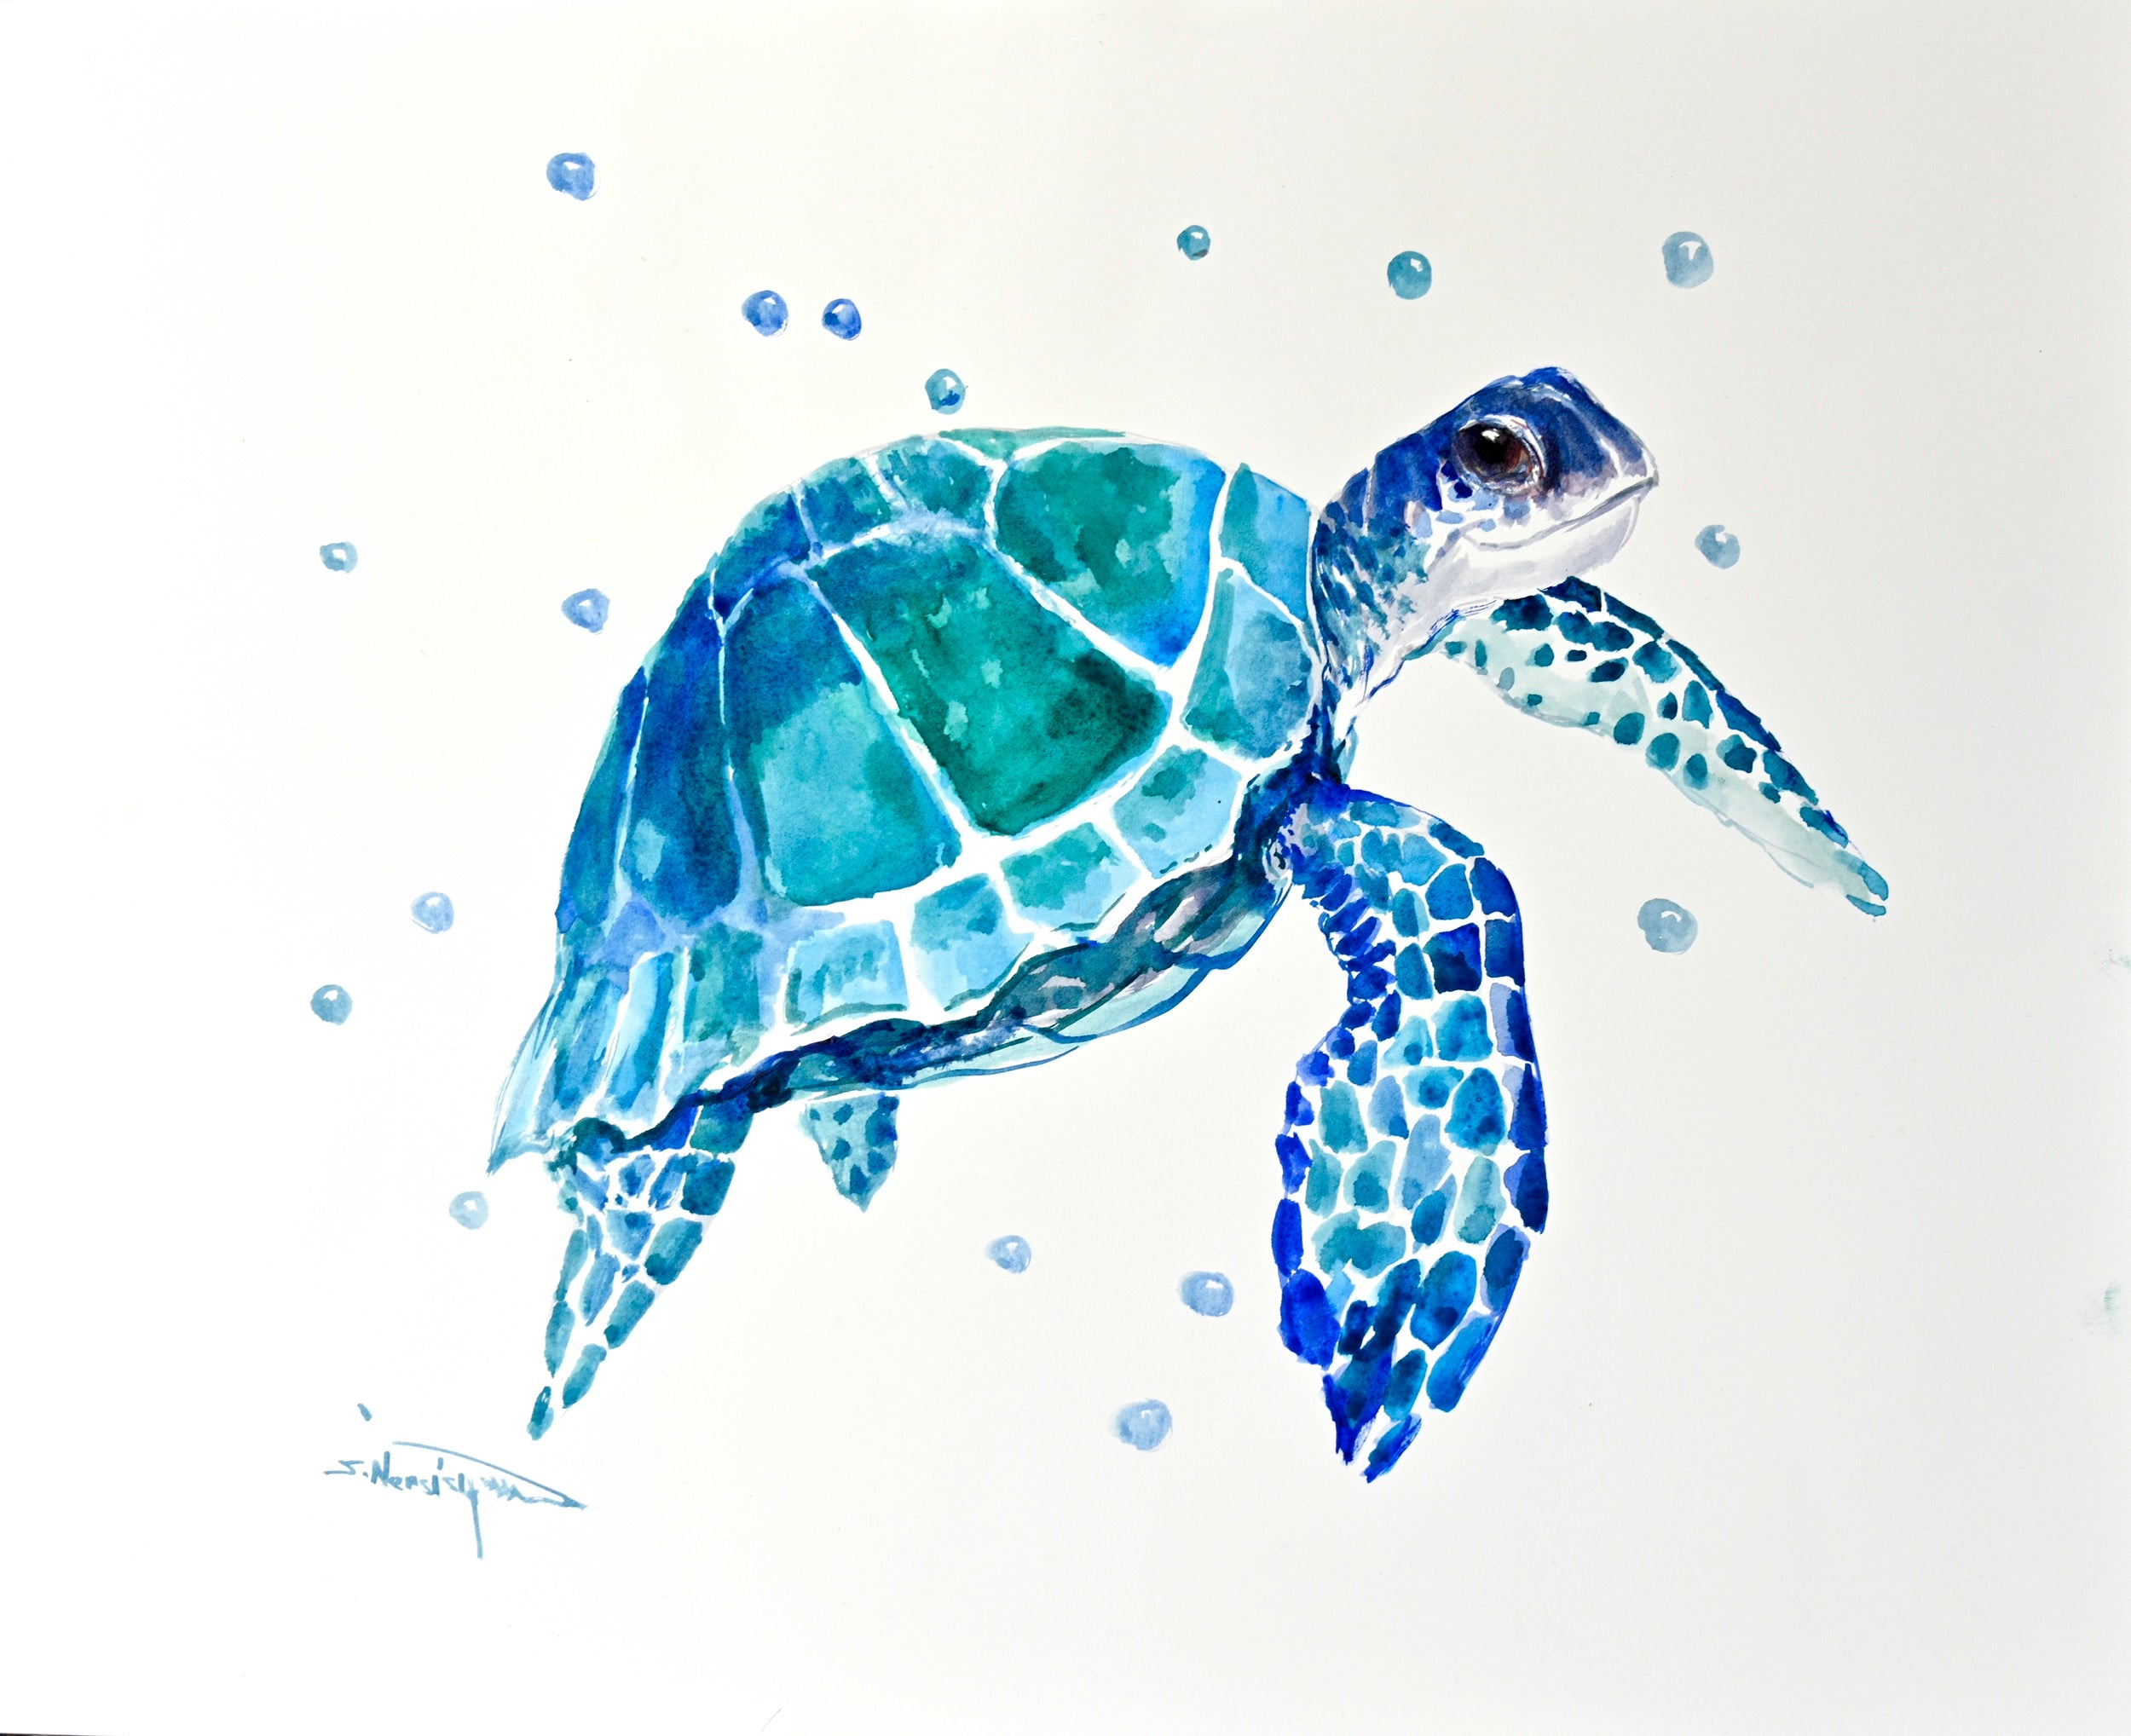 Sea Turtle - Commission by Suren Nersisyan - watercolor painting | UGallery